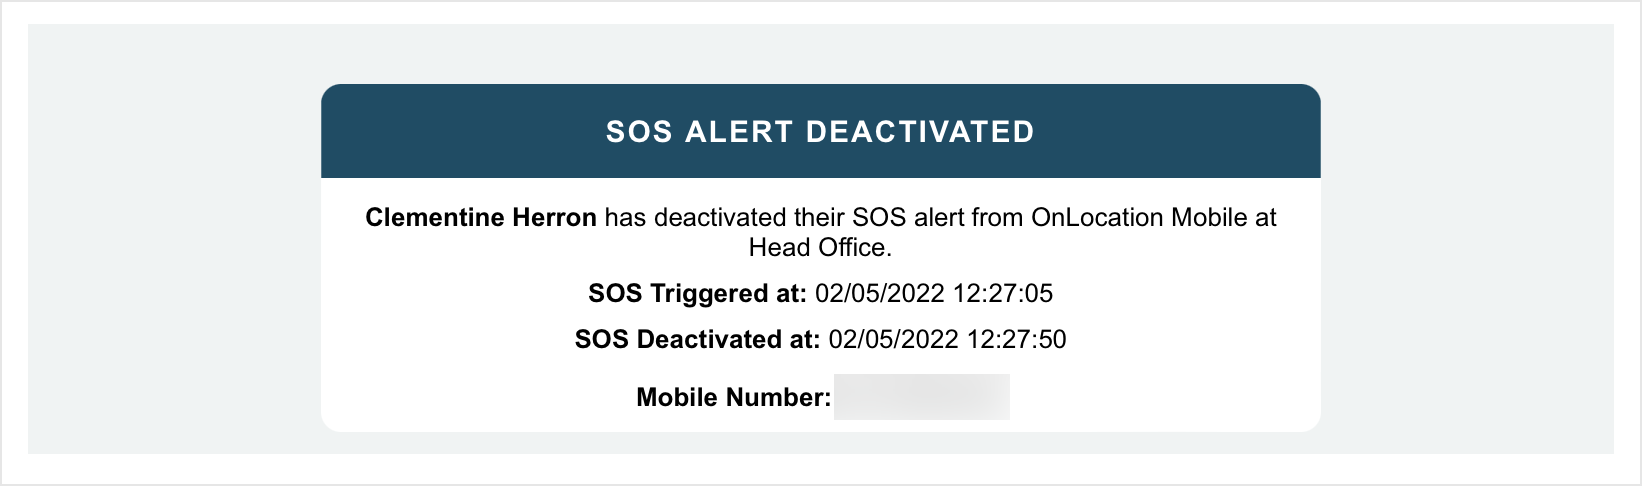 SOS-Deactivated-Email.png